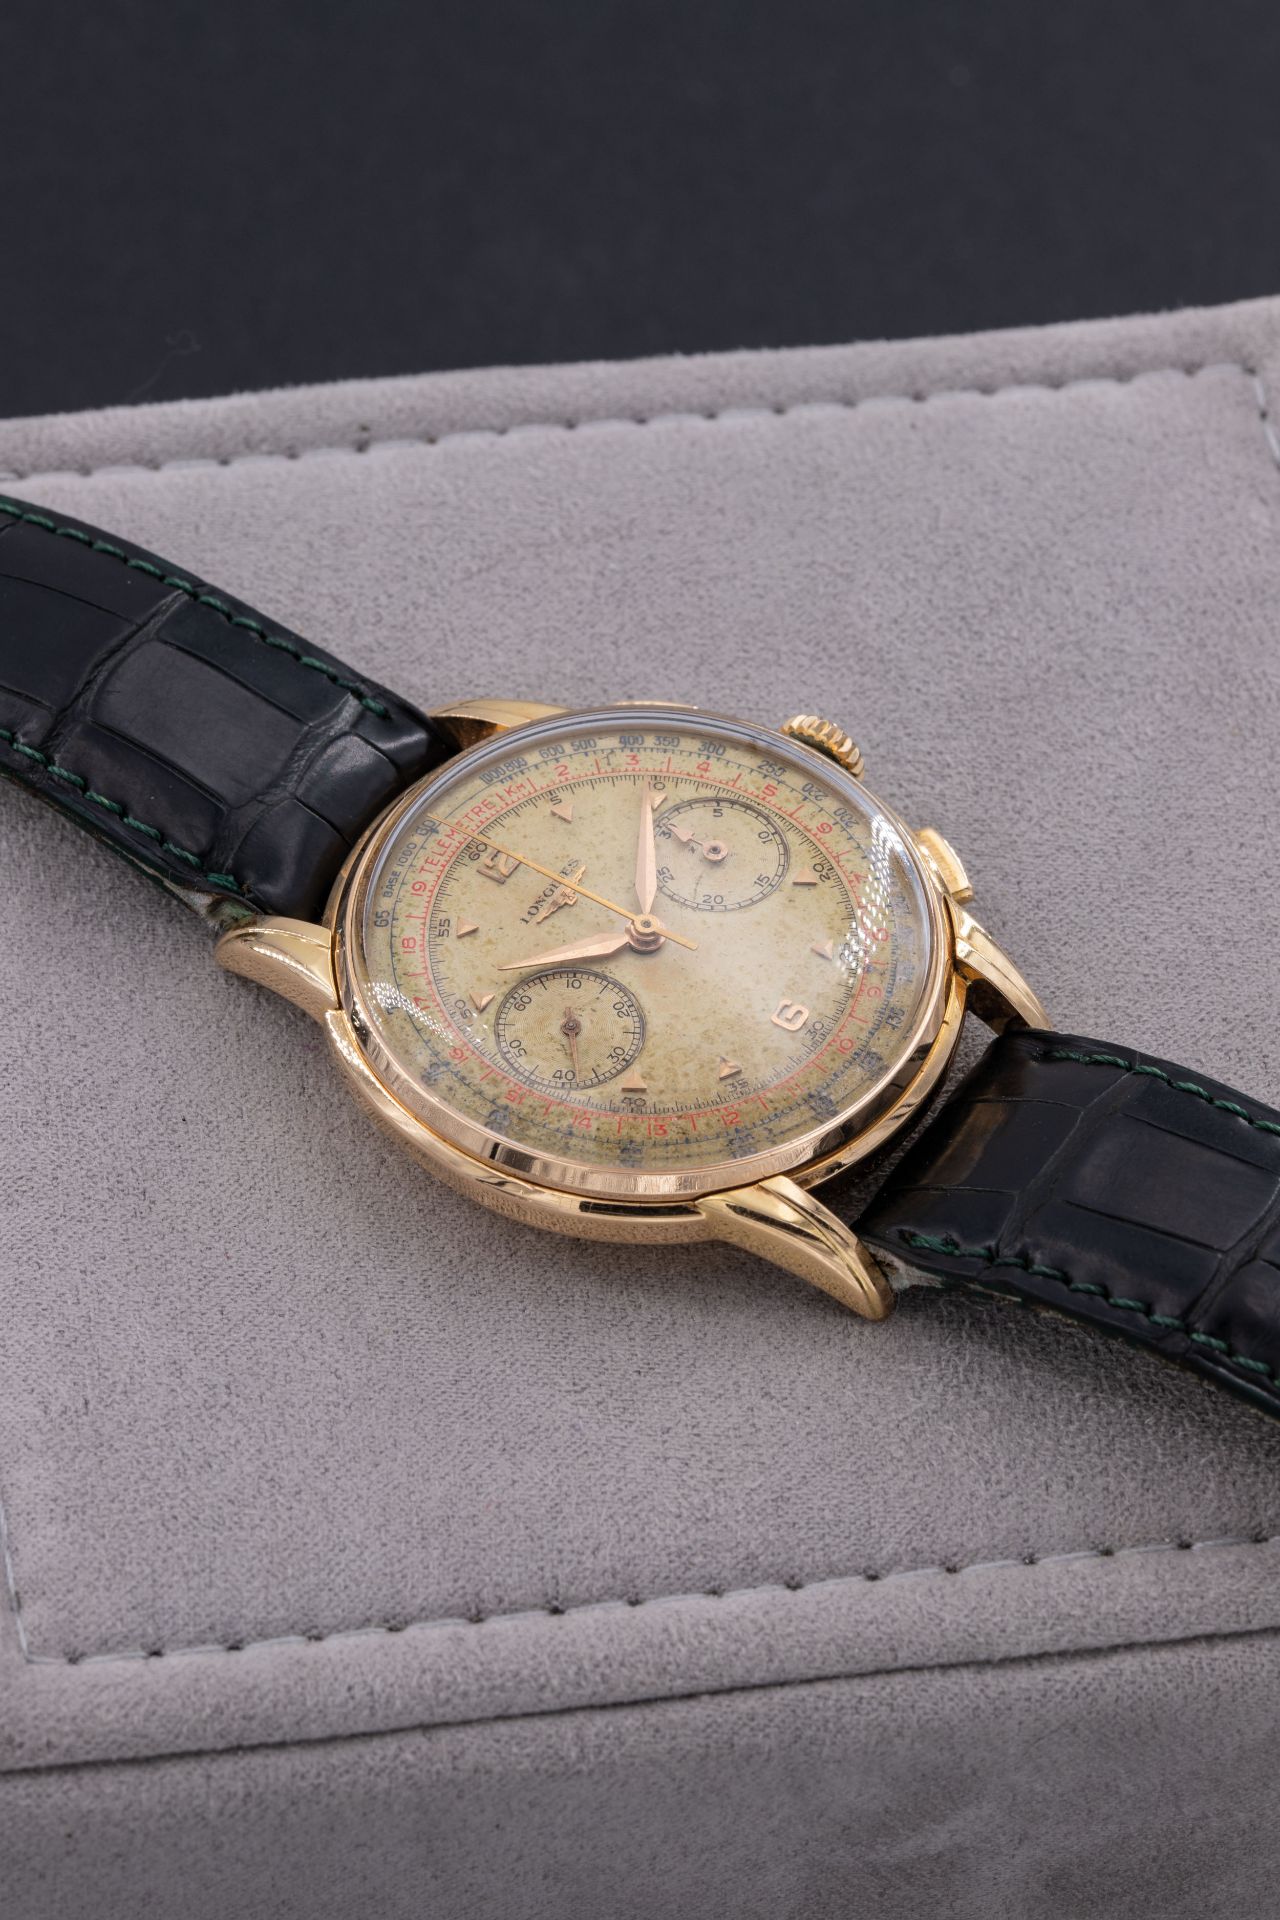 LONGINES 30CH CHRONOGRAPHE OR ROSE, VERS 1940 - Image 2 of 2